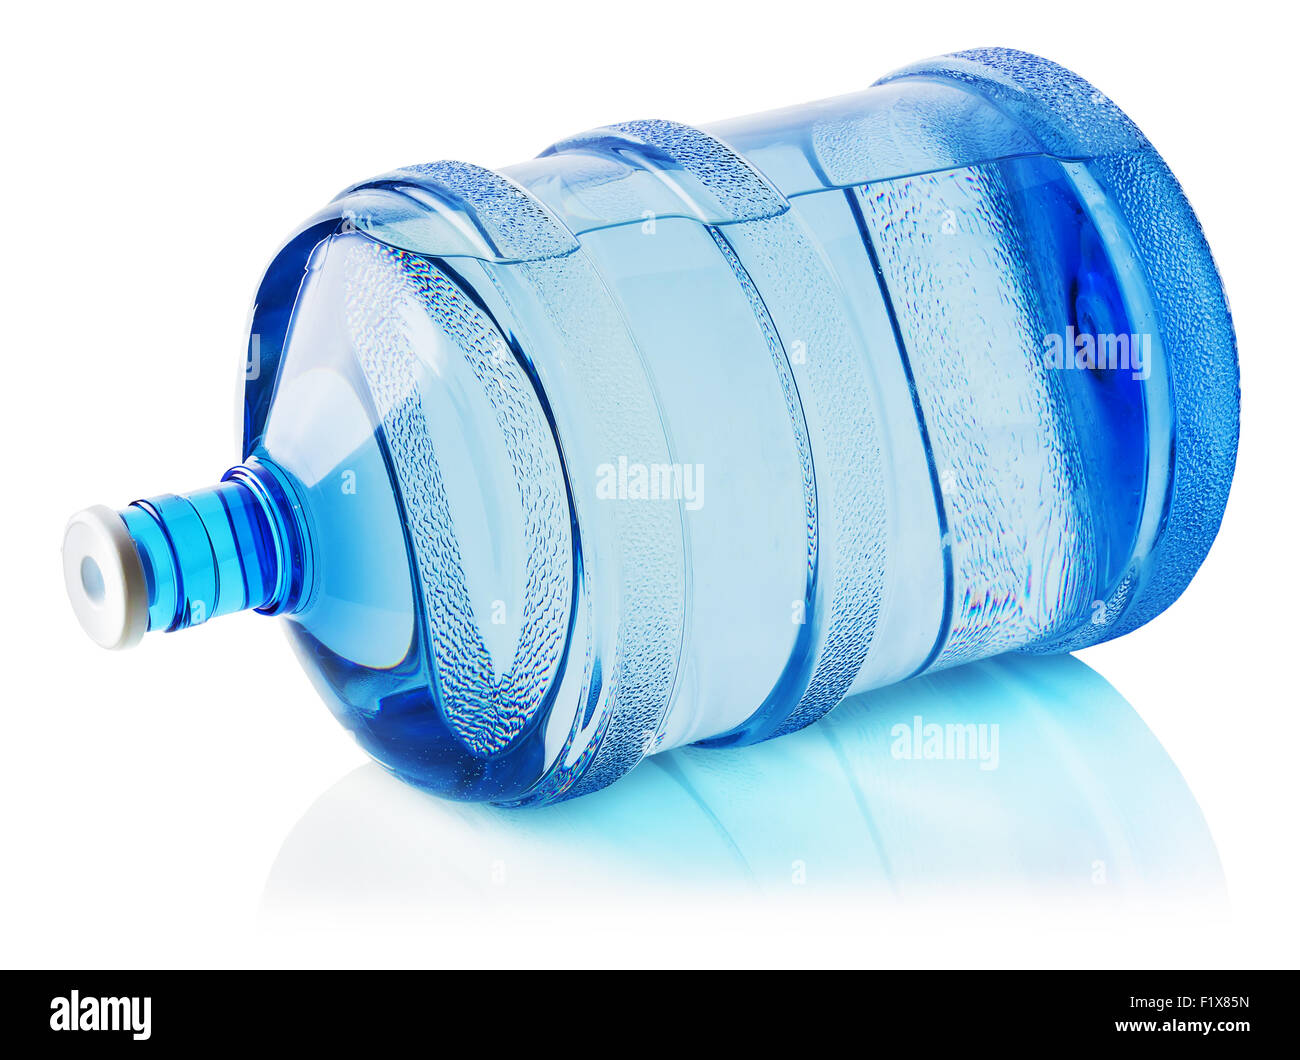 https://c8.alamy.com/comp/F1X85N/big-bottle-of-water-isolated-on-the-white-background-F1X85N.jpg